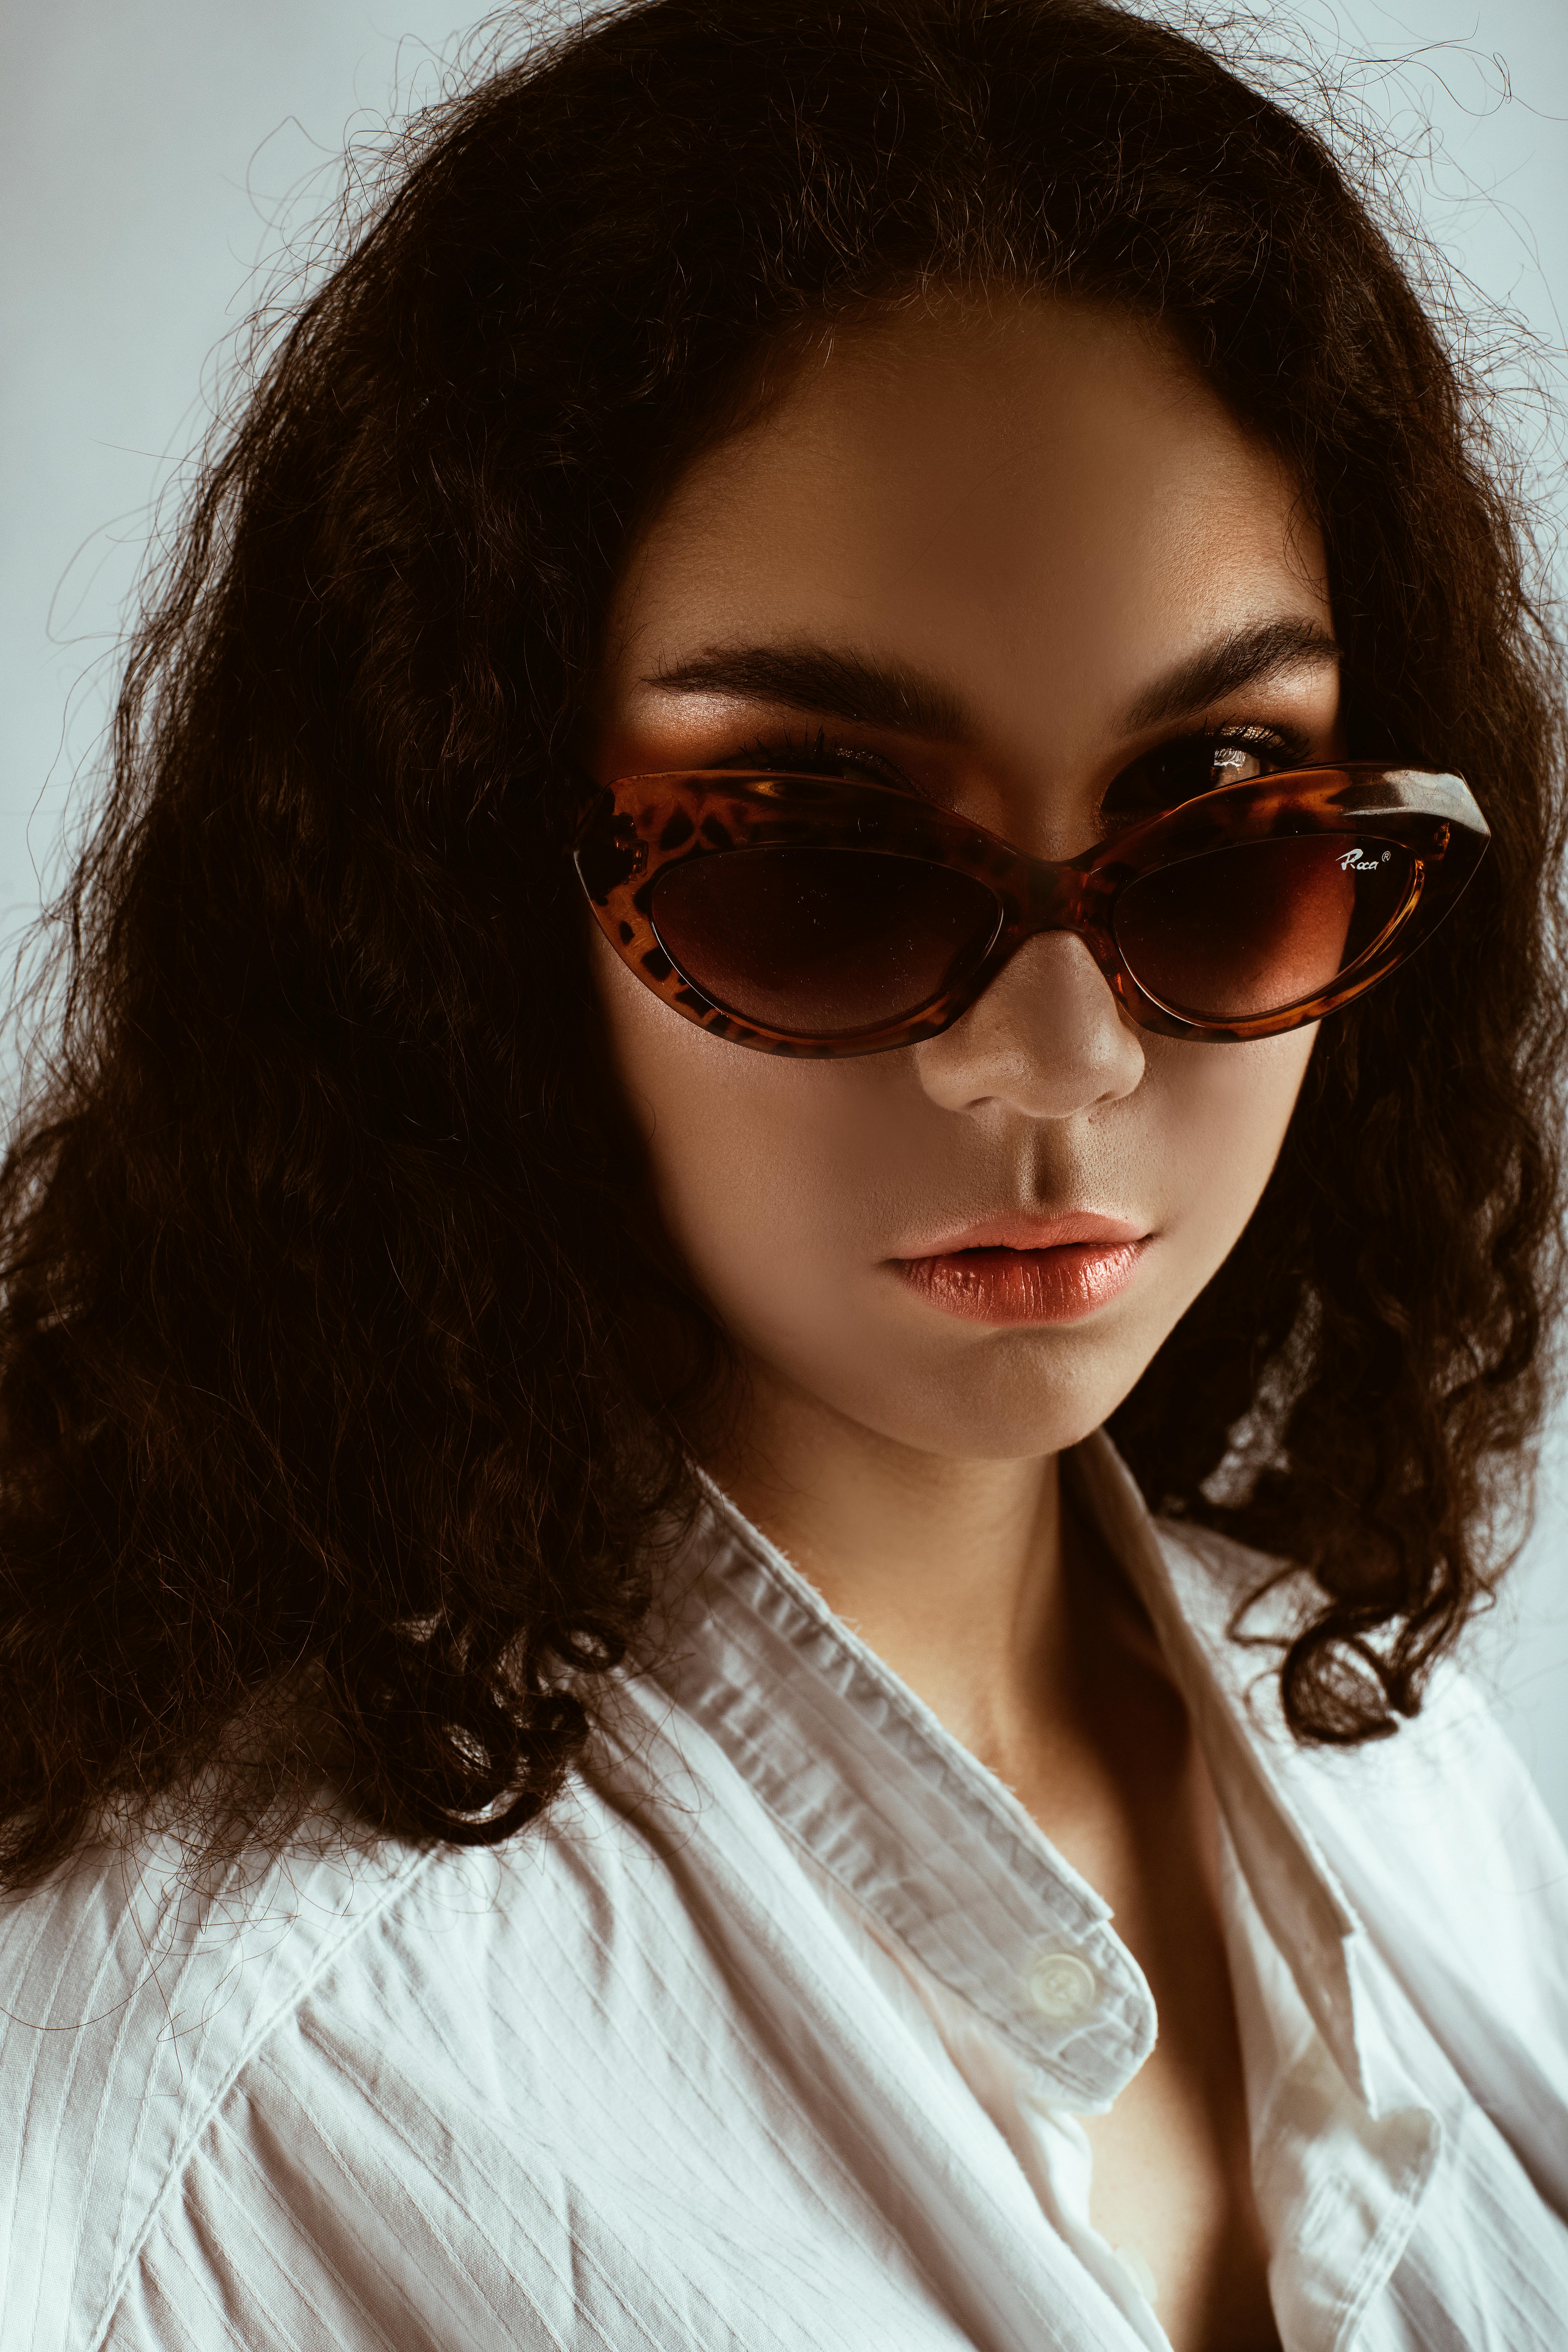 Portrait Photo of Woman in Sunglasses and White Shirt Posing